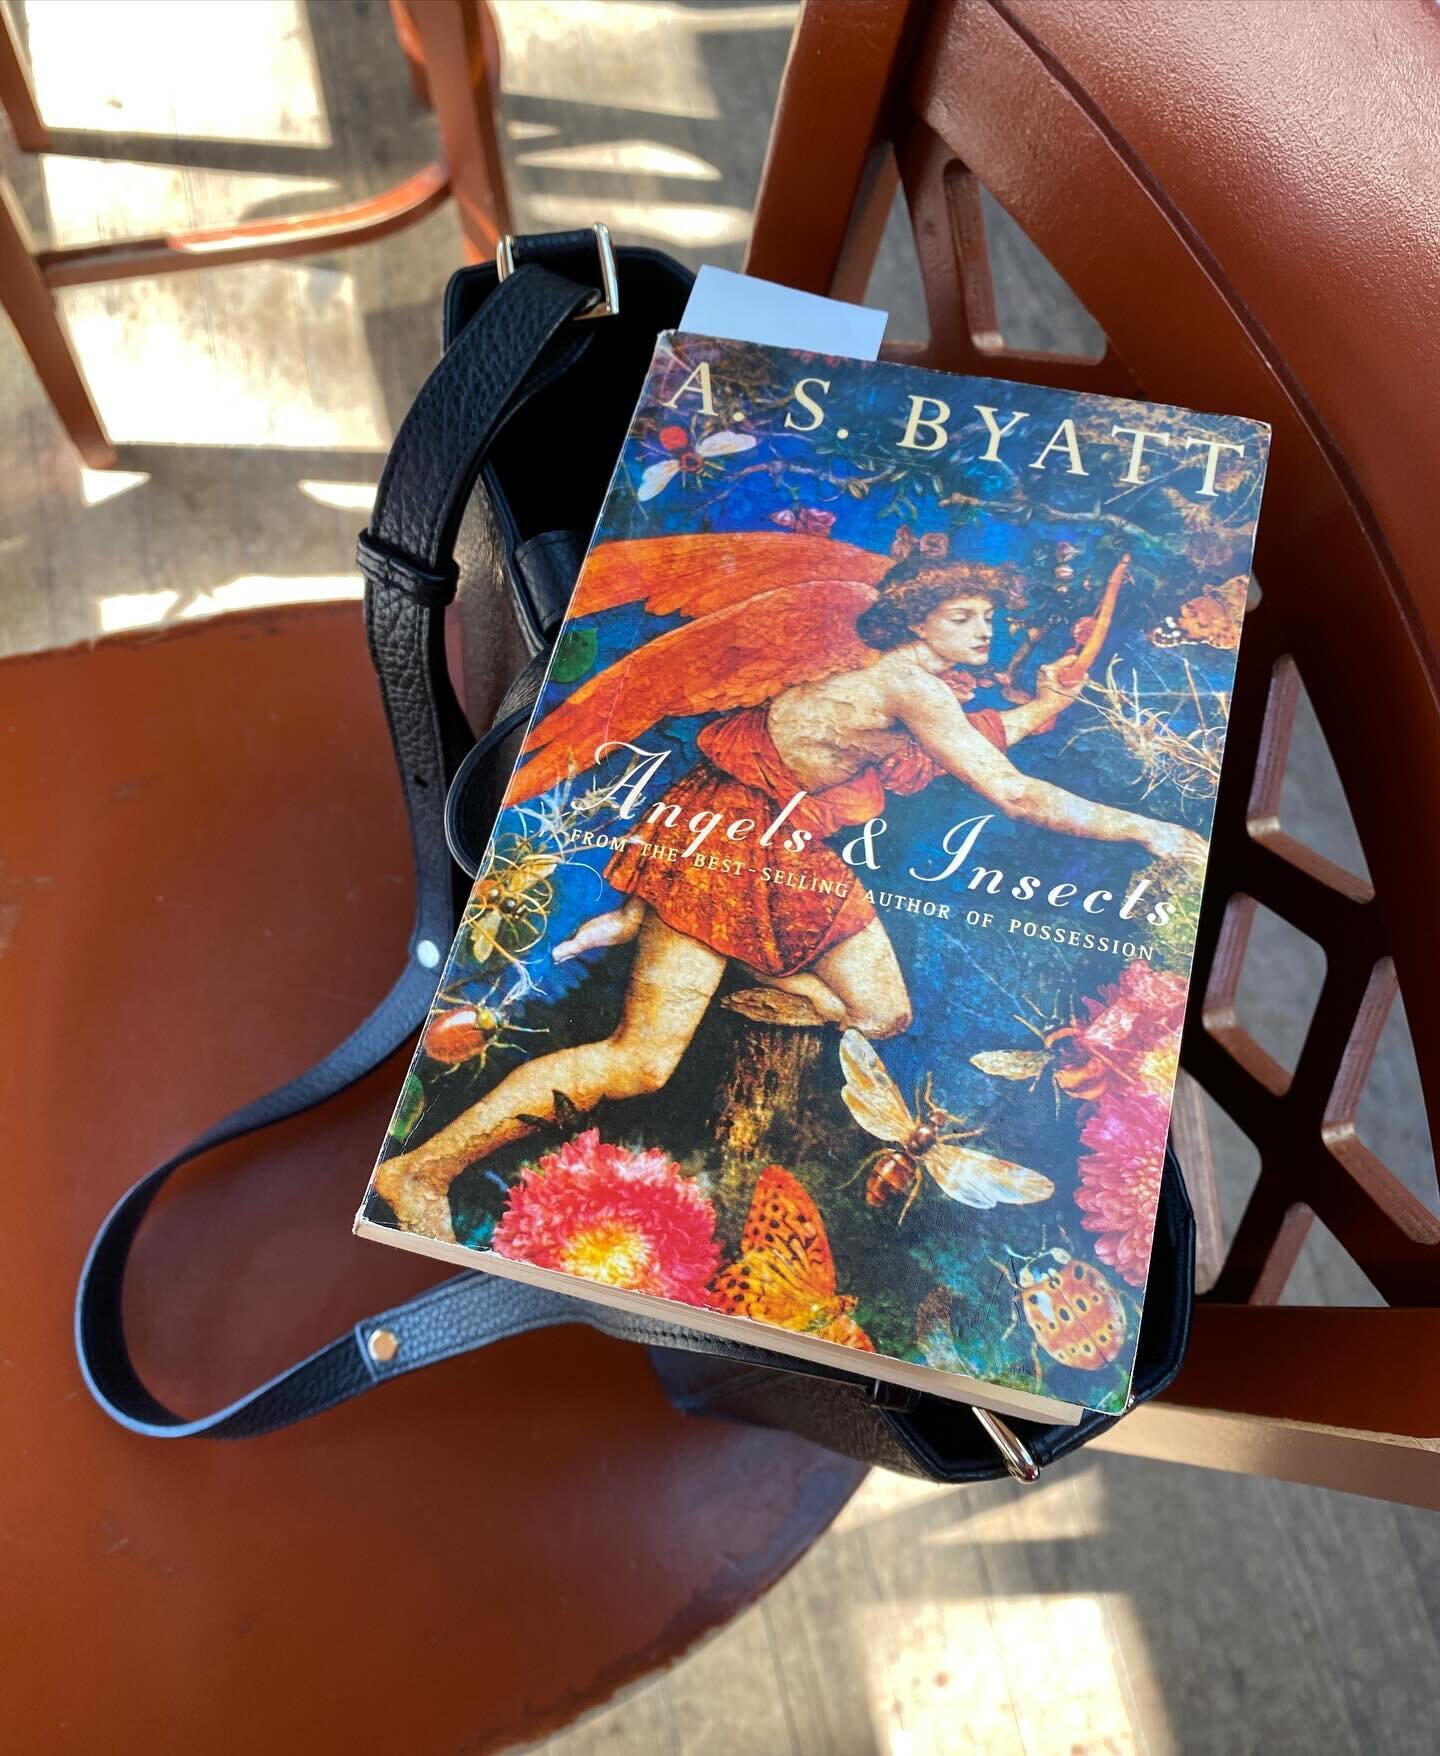 Recently, I read a Reddit thread on small changes that made people&rsquo;s lives better, and one woman mentioned that she always has a book in her purse; whenever she has the urge to (unnecessarily) look at her phone, she picks up the book instead. 
